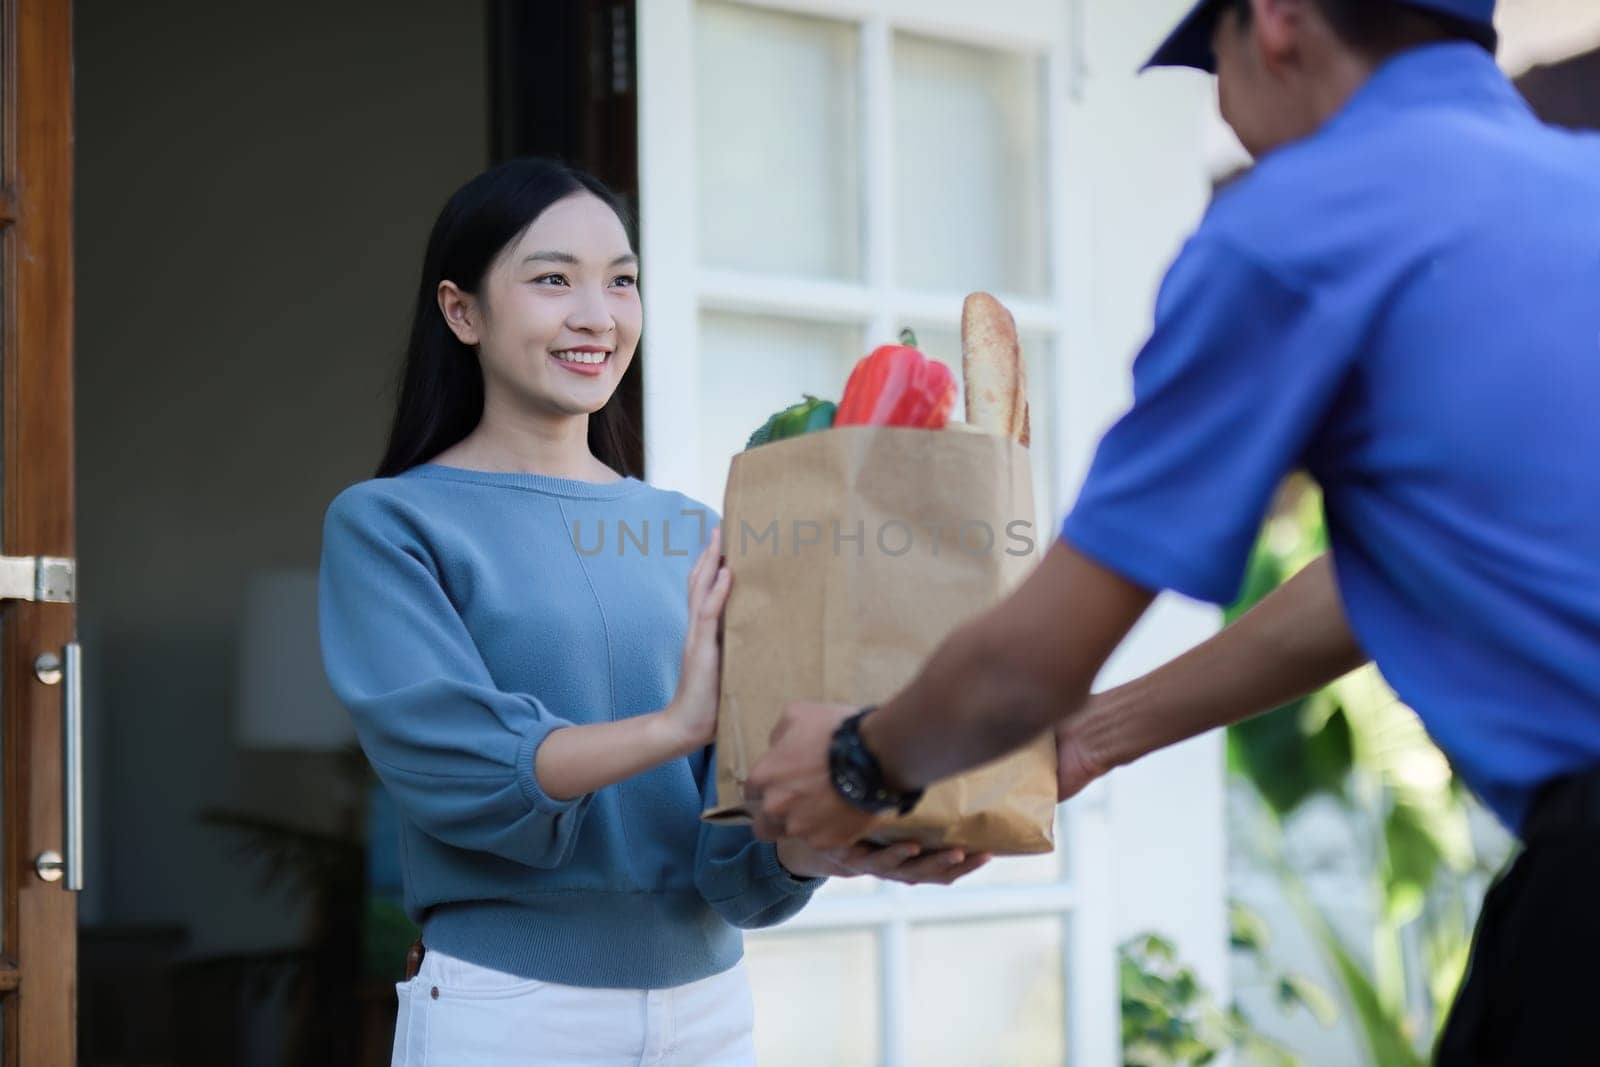 delivery man Deliver a paper bag package to the beautiful woman at the front of the house according to the order. by wichayada